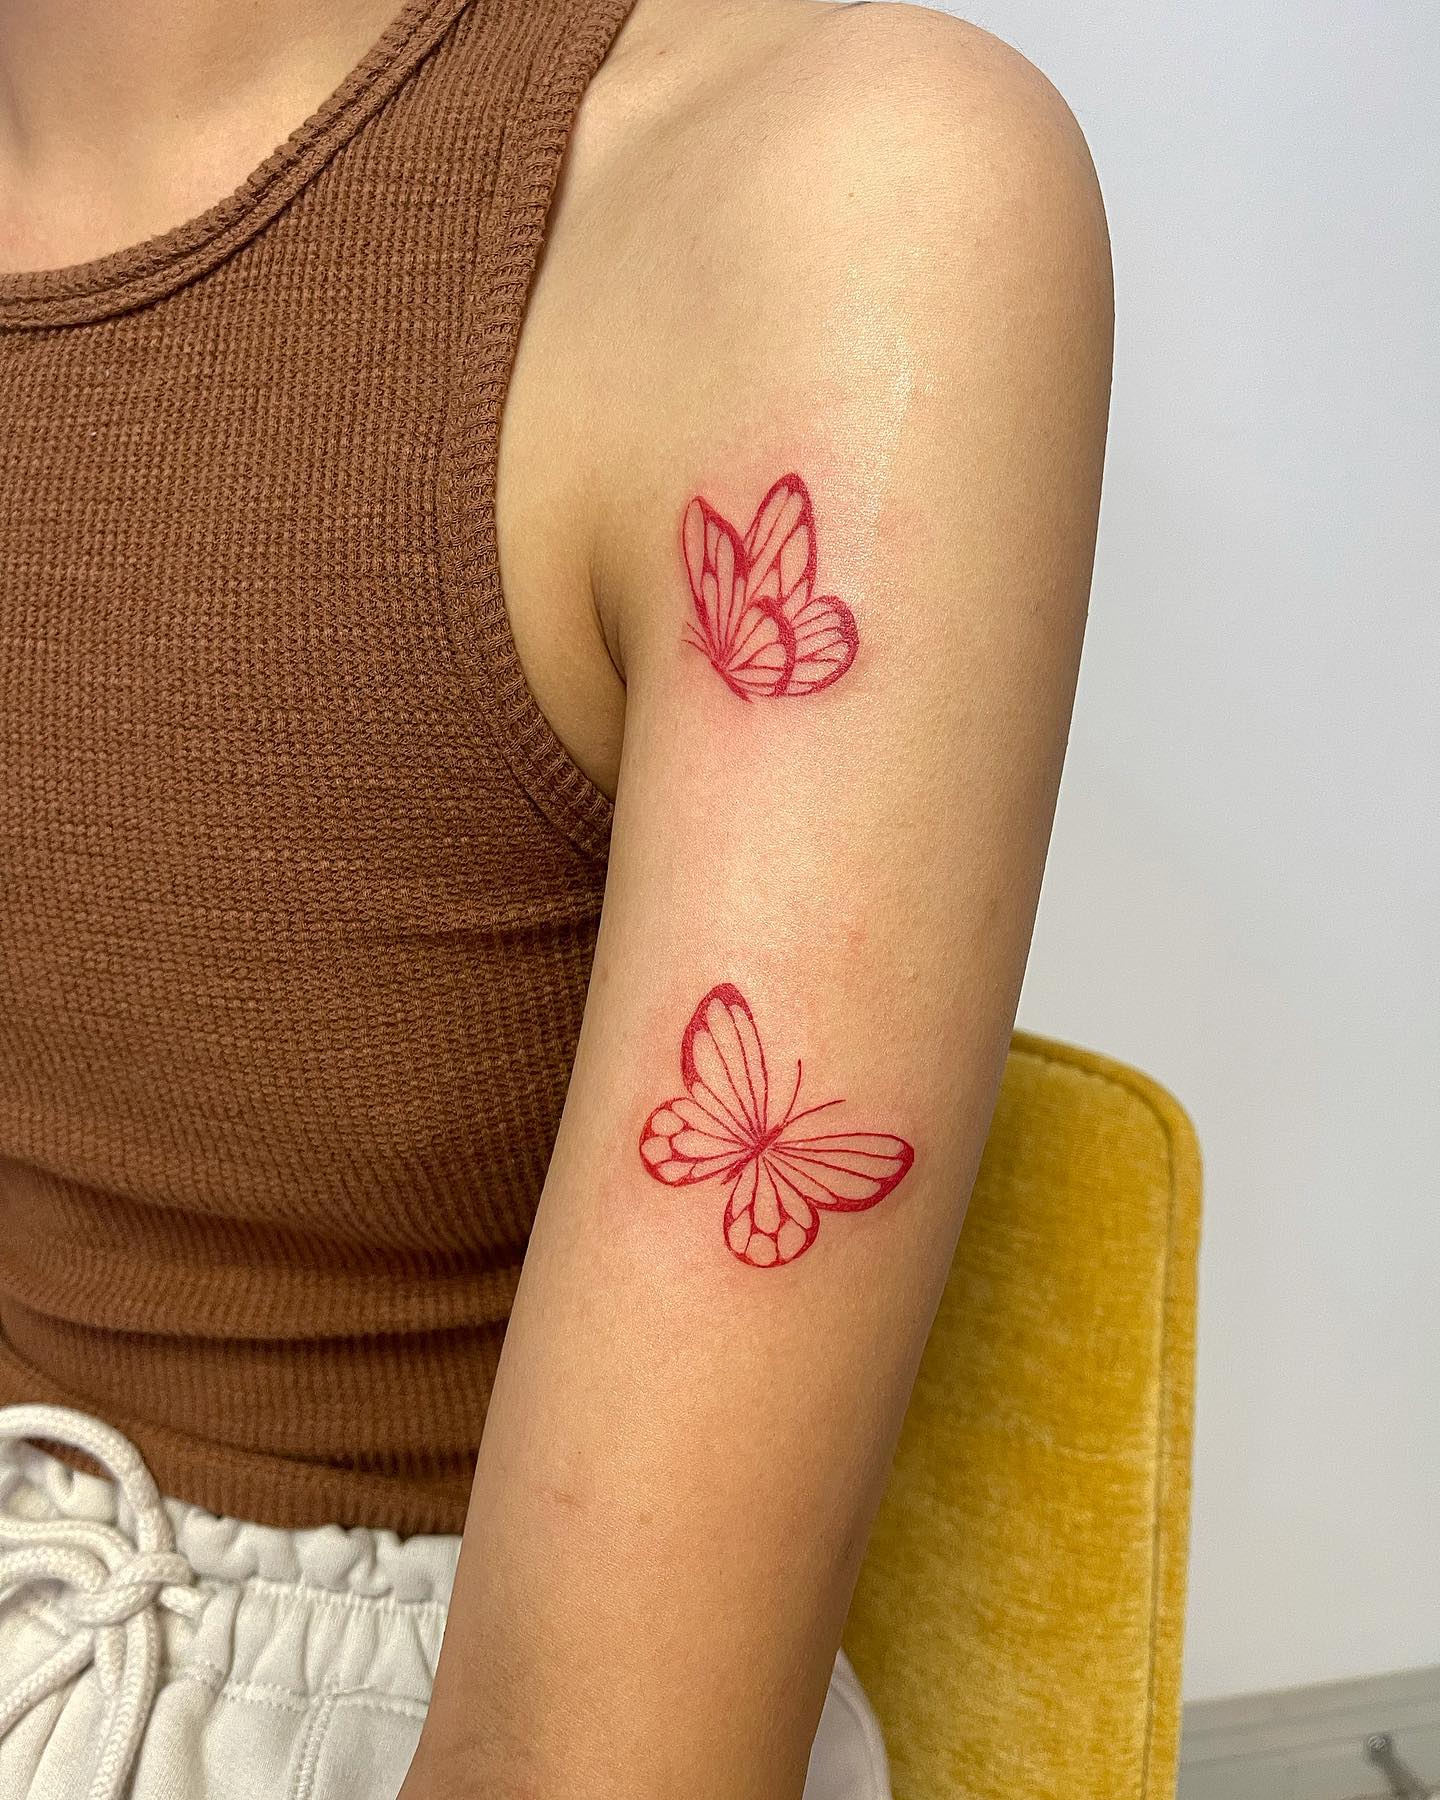 What does a red butterfly tattoo mean